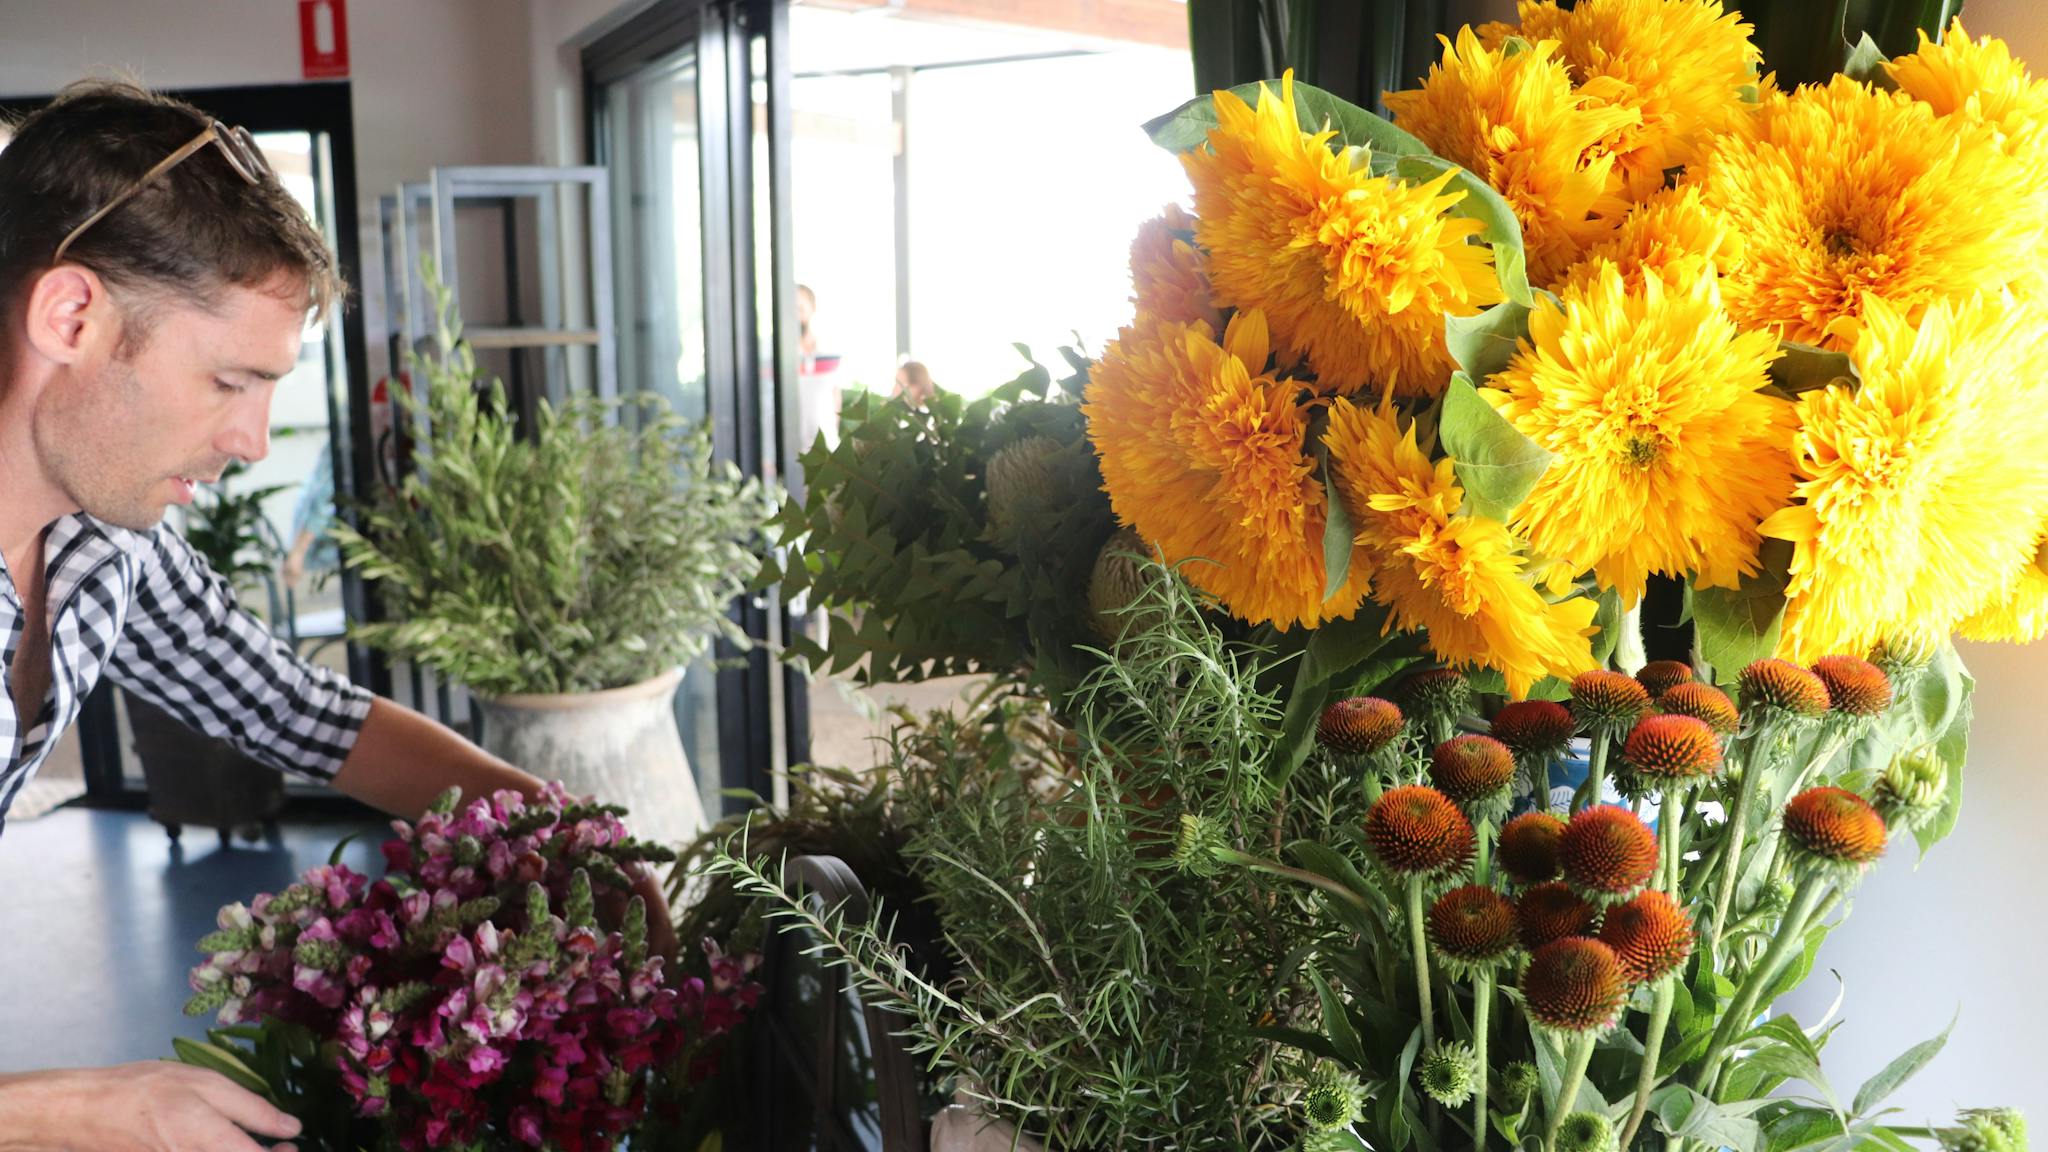 A Pantry staff member can be seen organising fresh sunflowers and snapdragons ready for purchase.